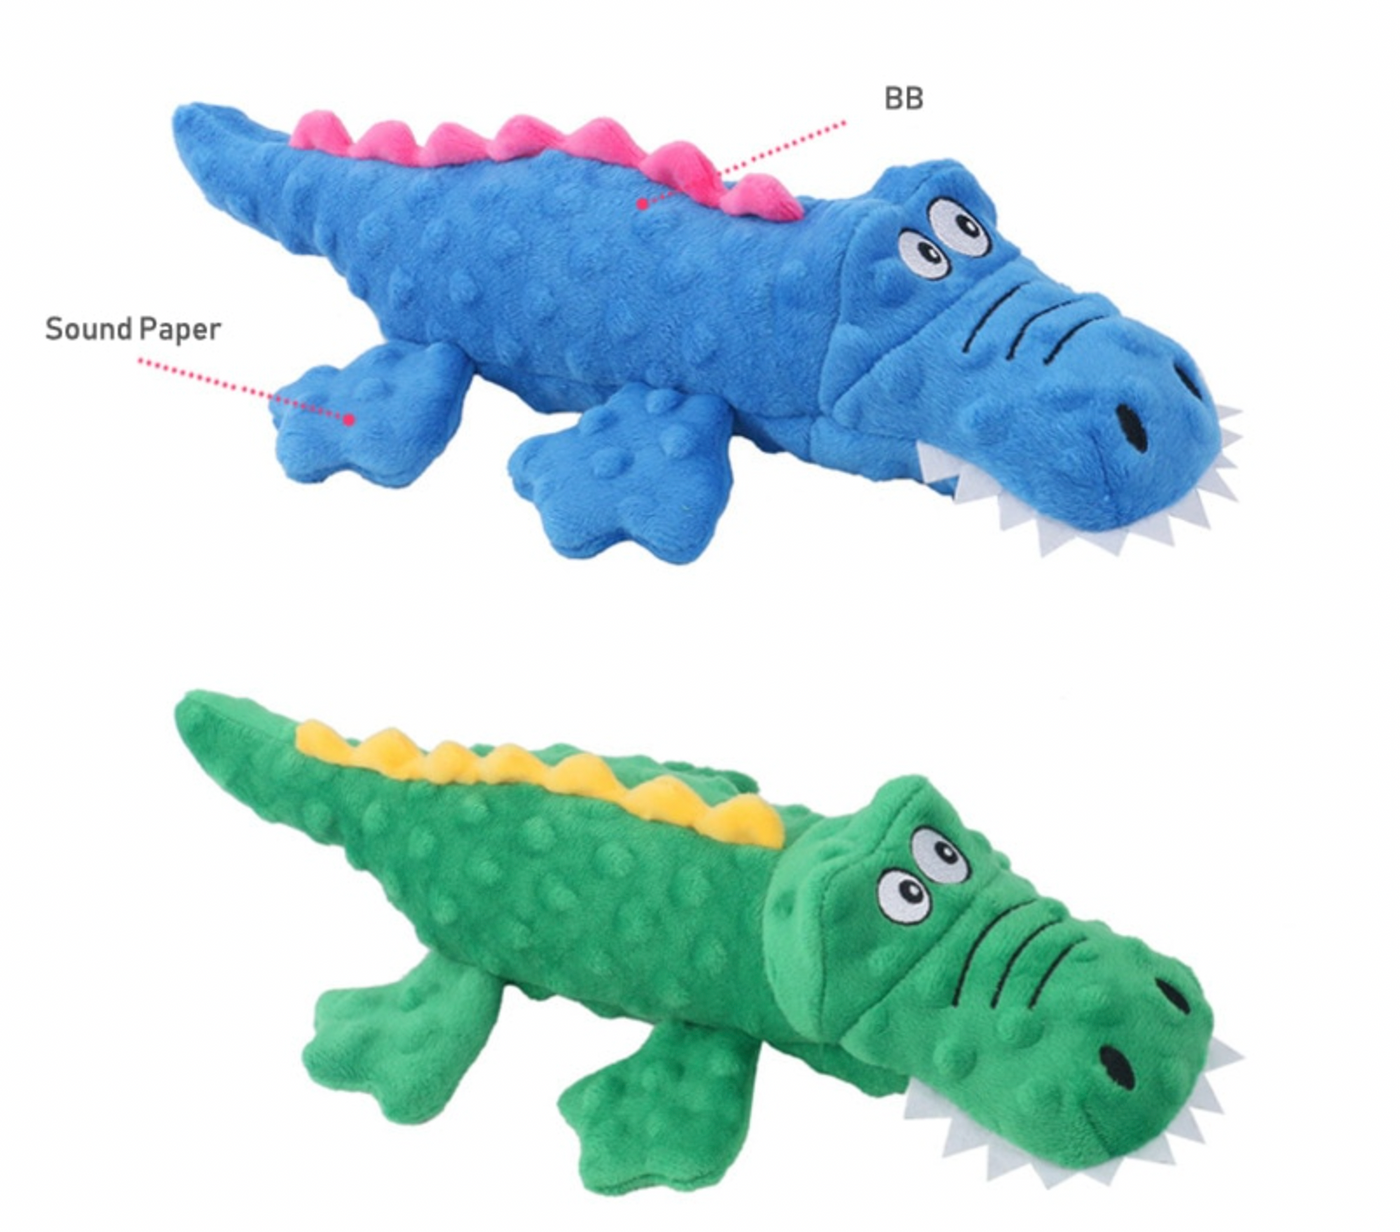 two crocodile-shaped dog toys, colored blue and green